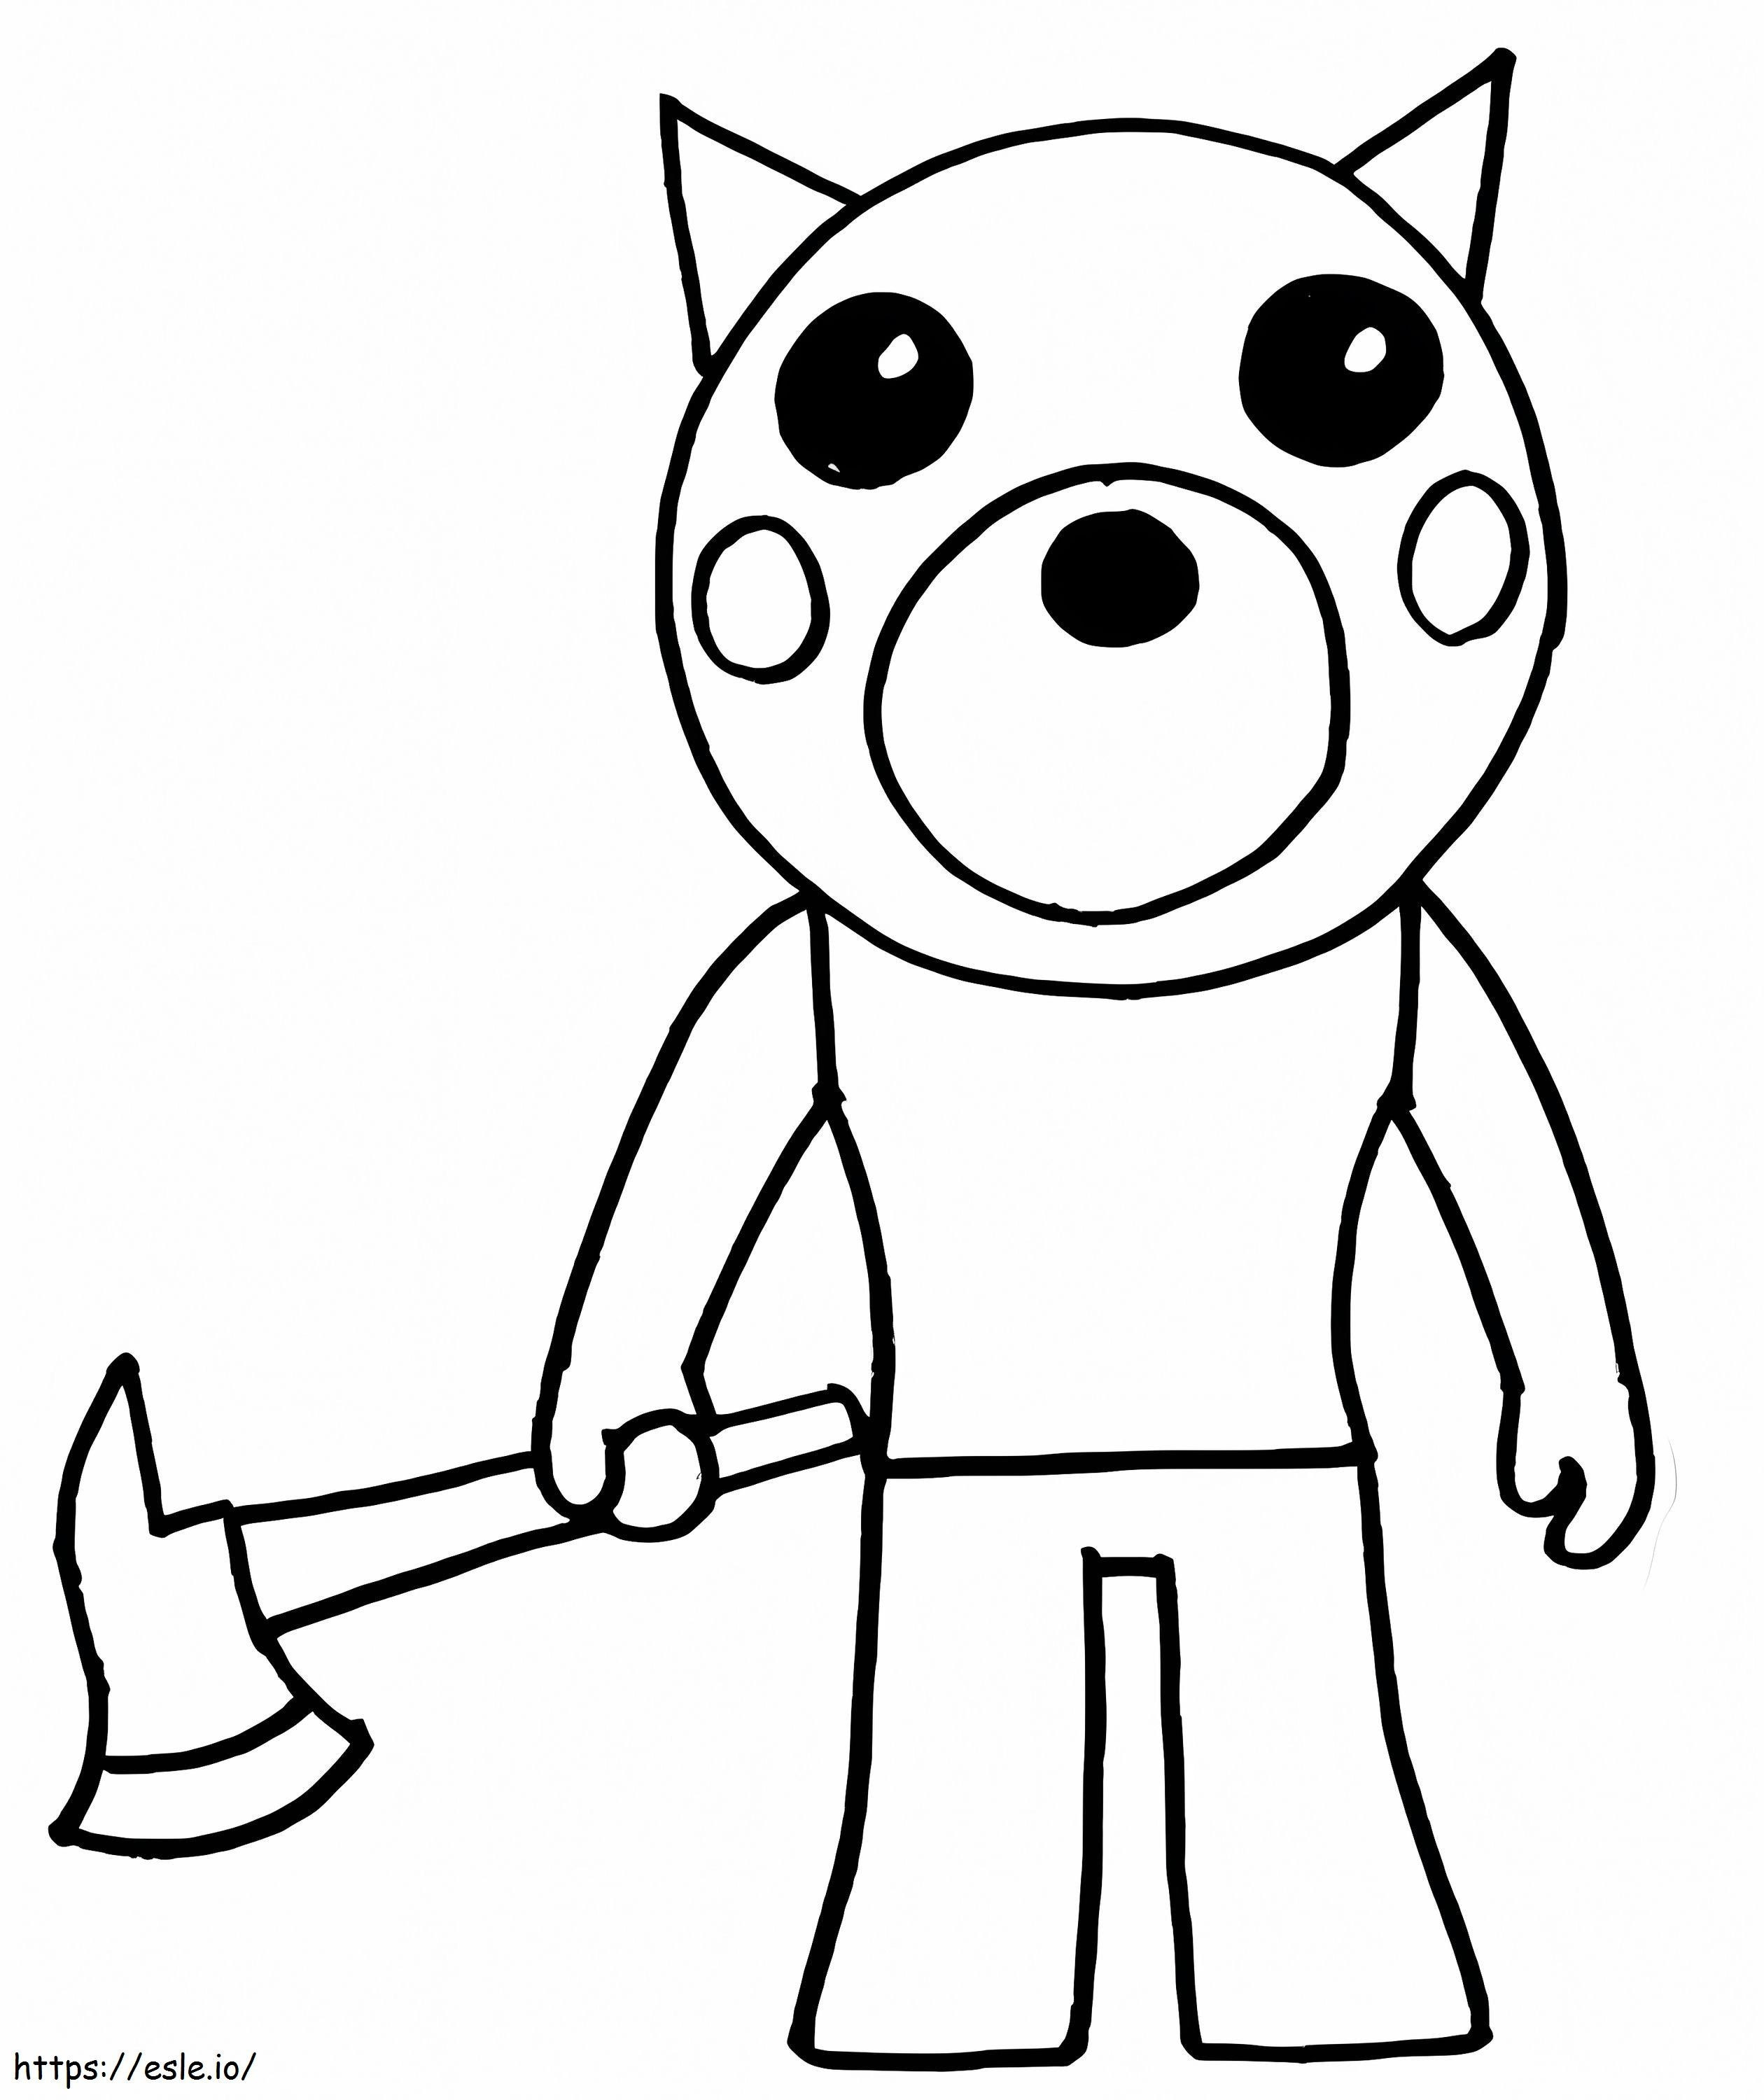 Doggy Piggy Roblox coloring page